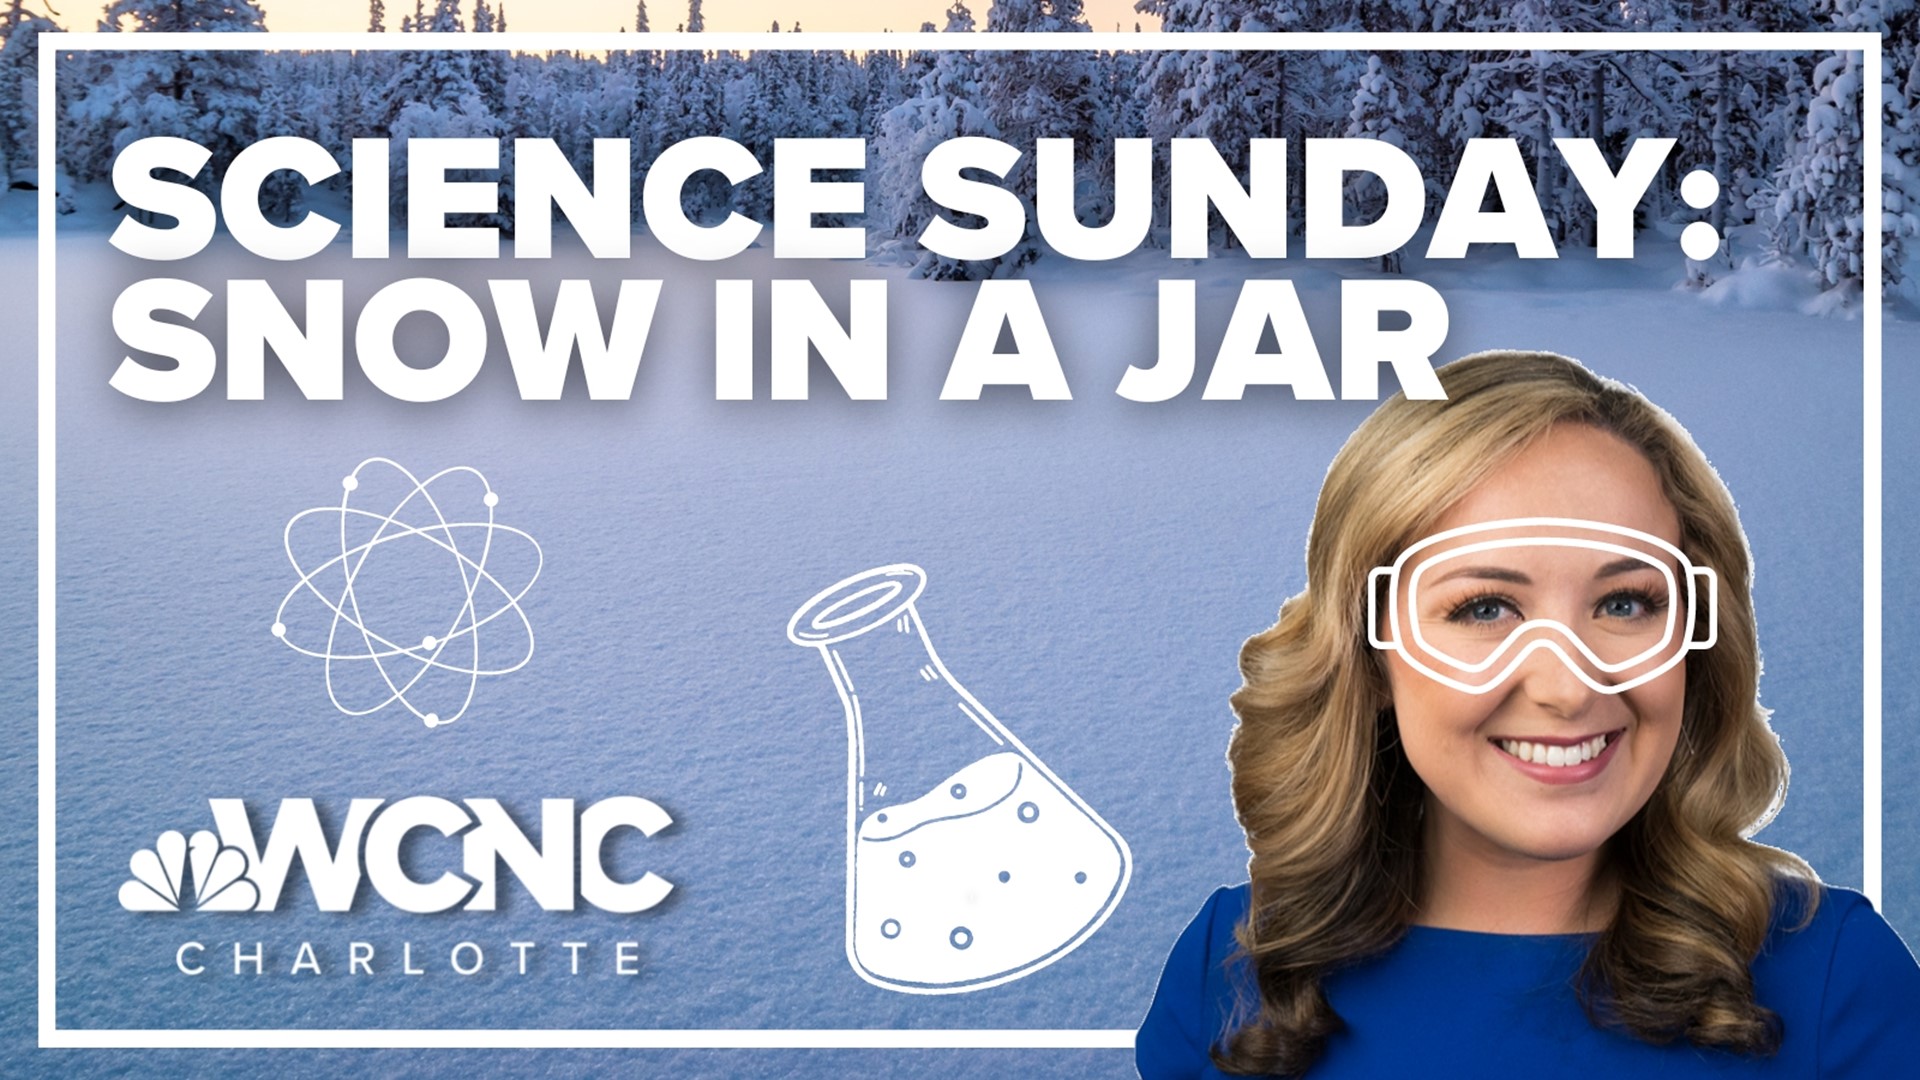 Meteorologist Brittany Van Voorhees joining us after the break with a fun experiment to do with your kids this weekend.